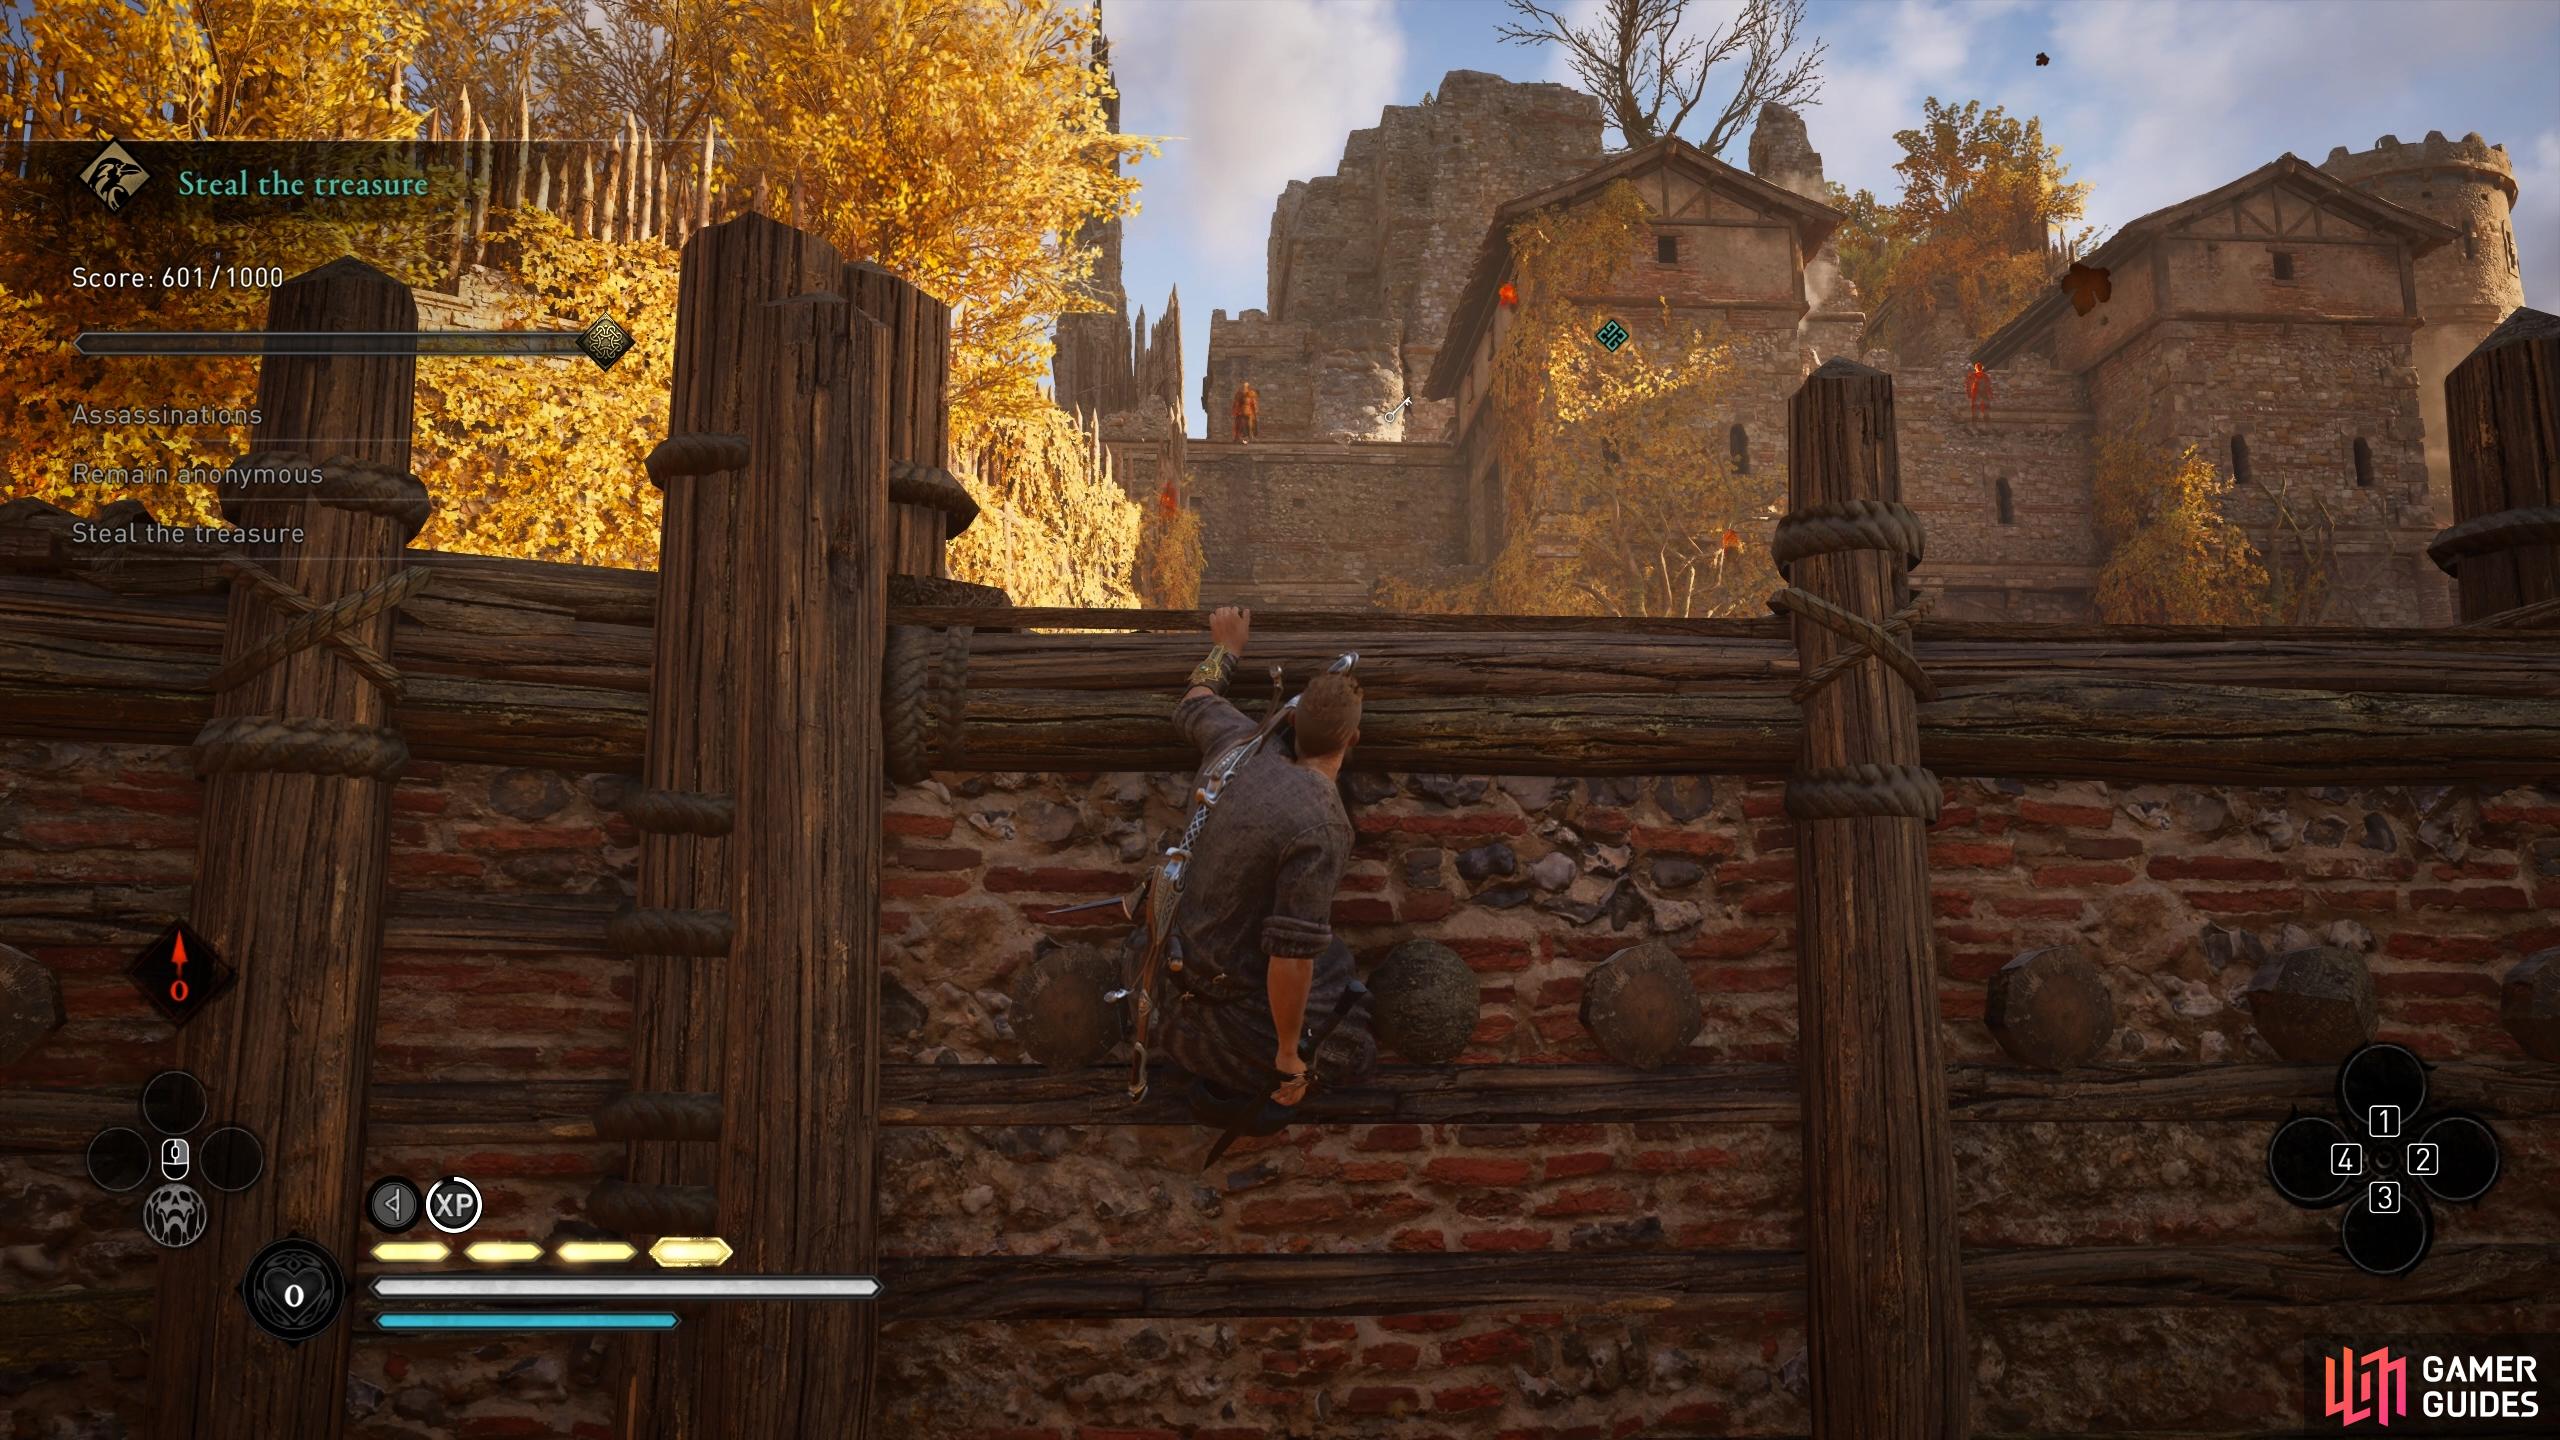 Wait for the guard on the ledge to move away before you run beneath the wall.